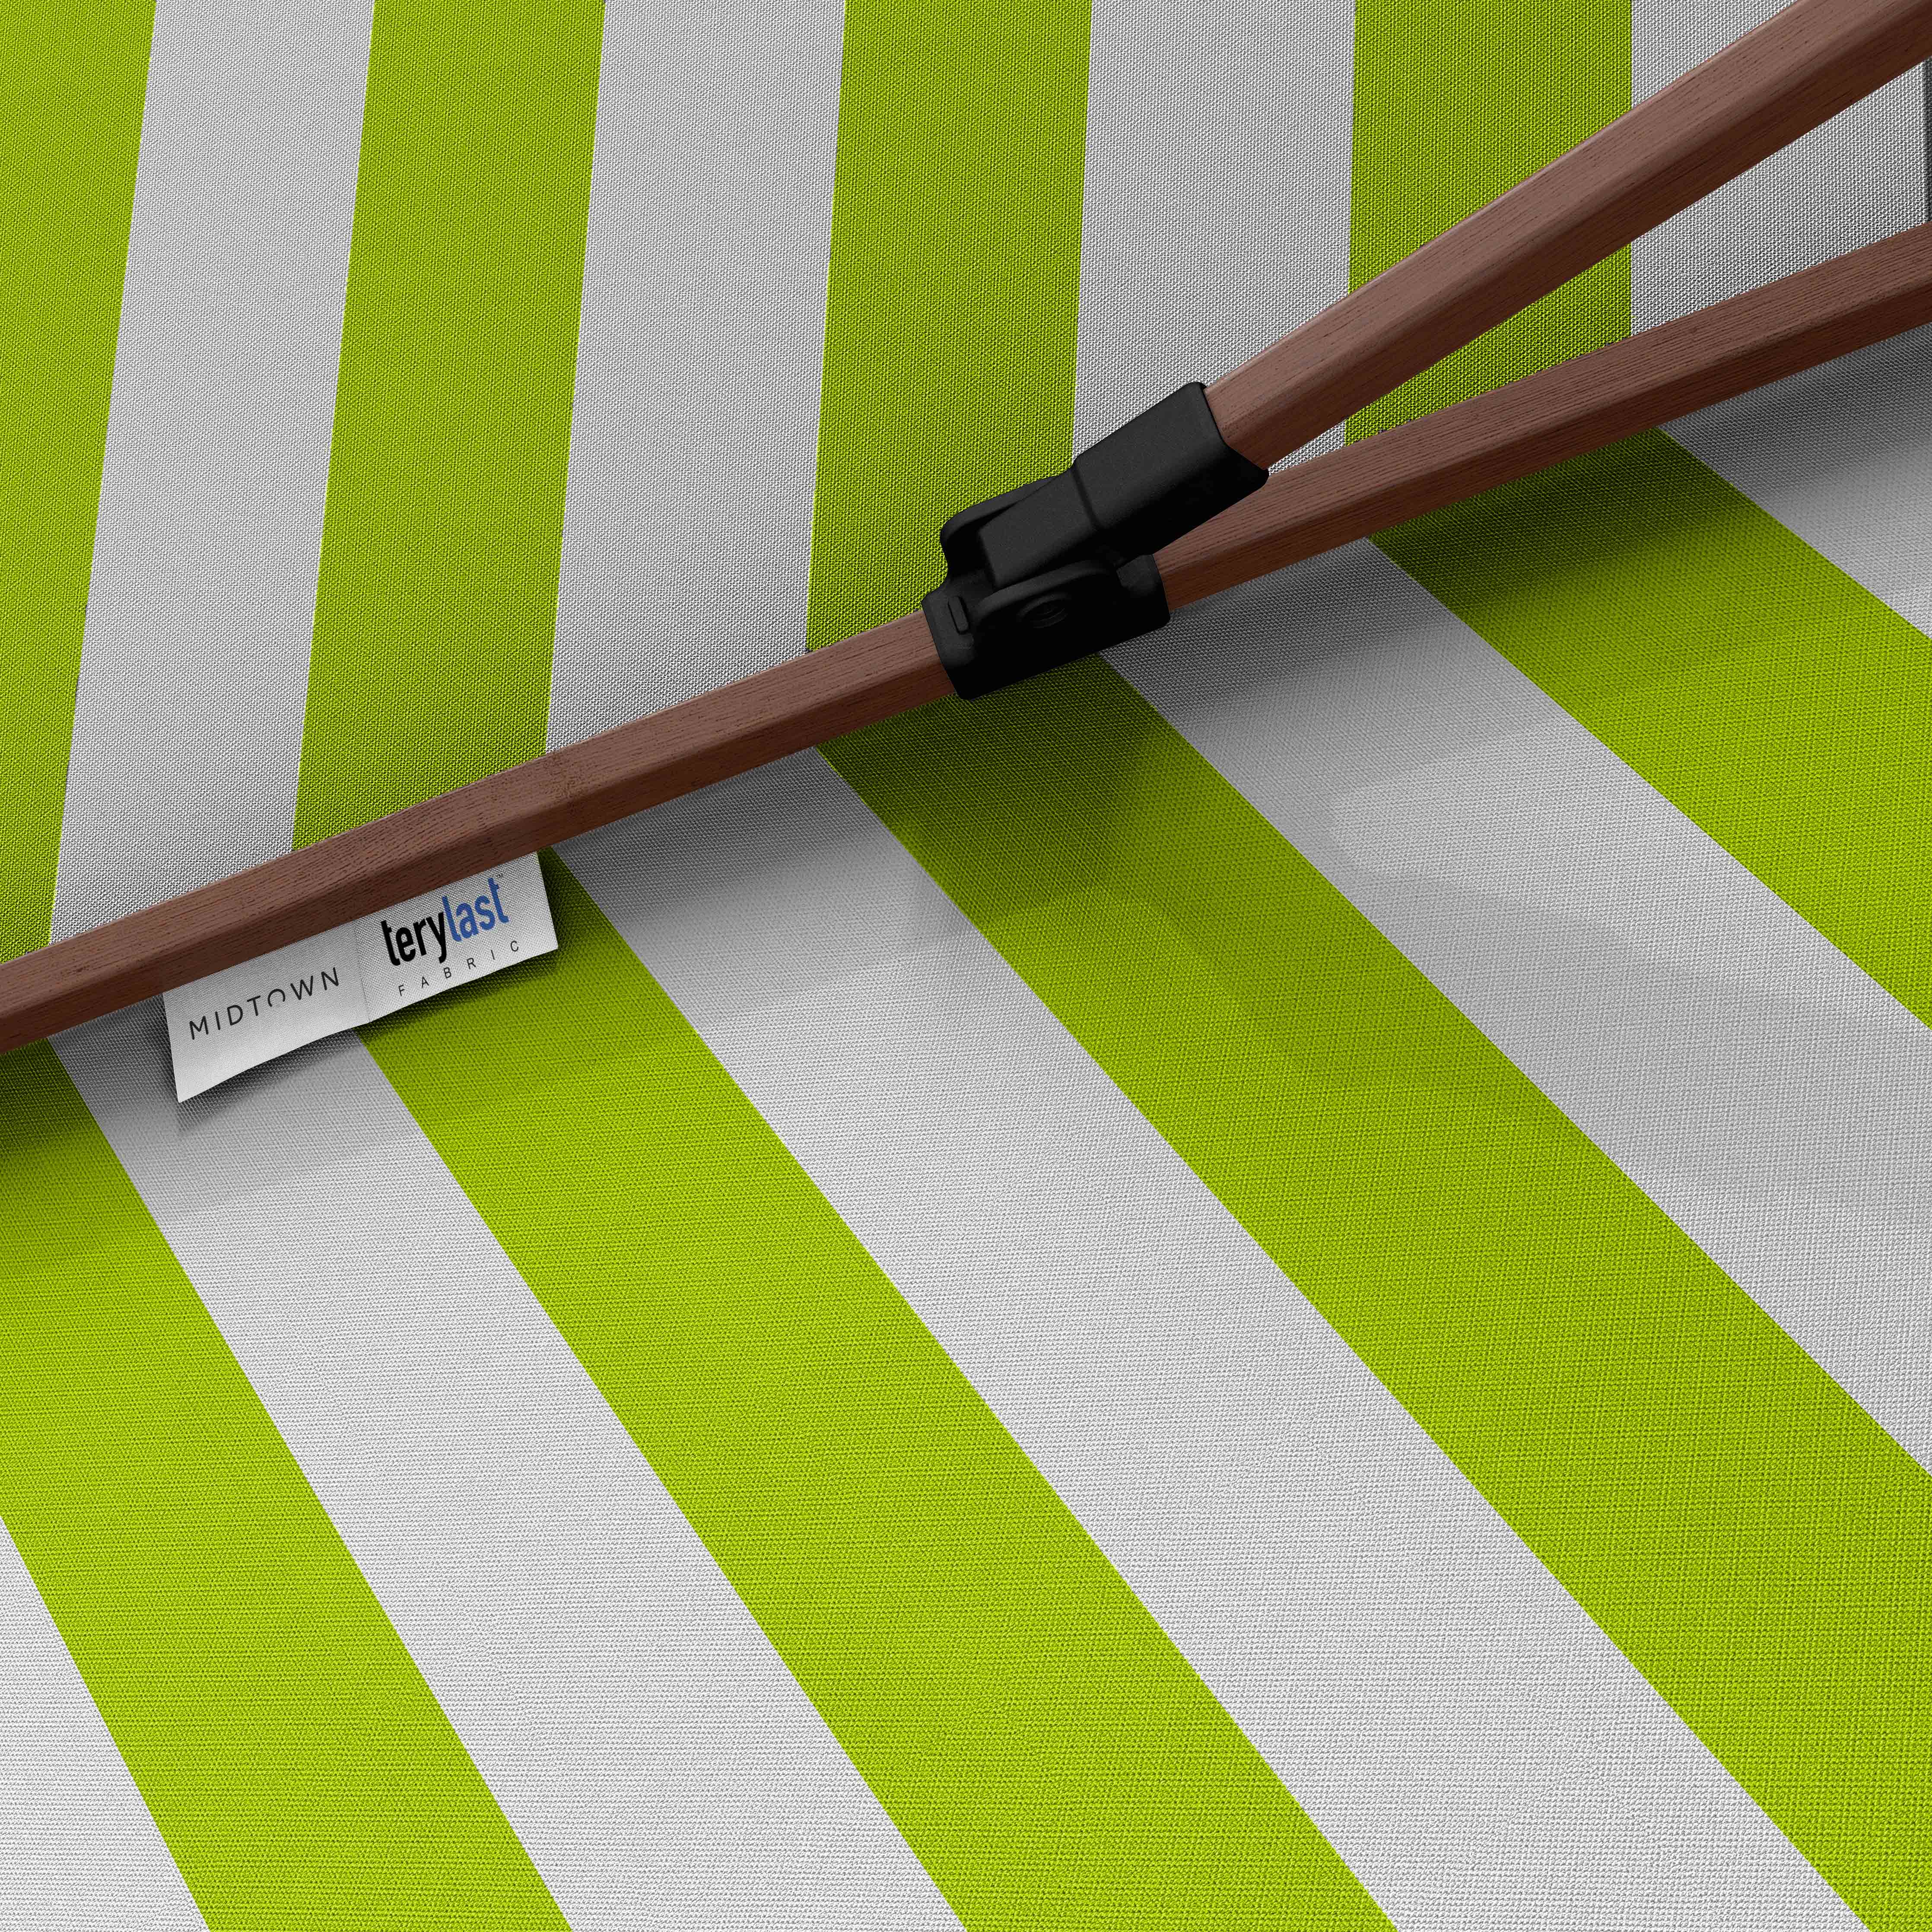 The Wooden 2™ - Terylast Pear Stripes